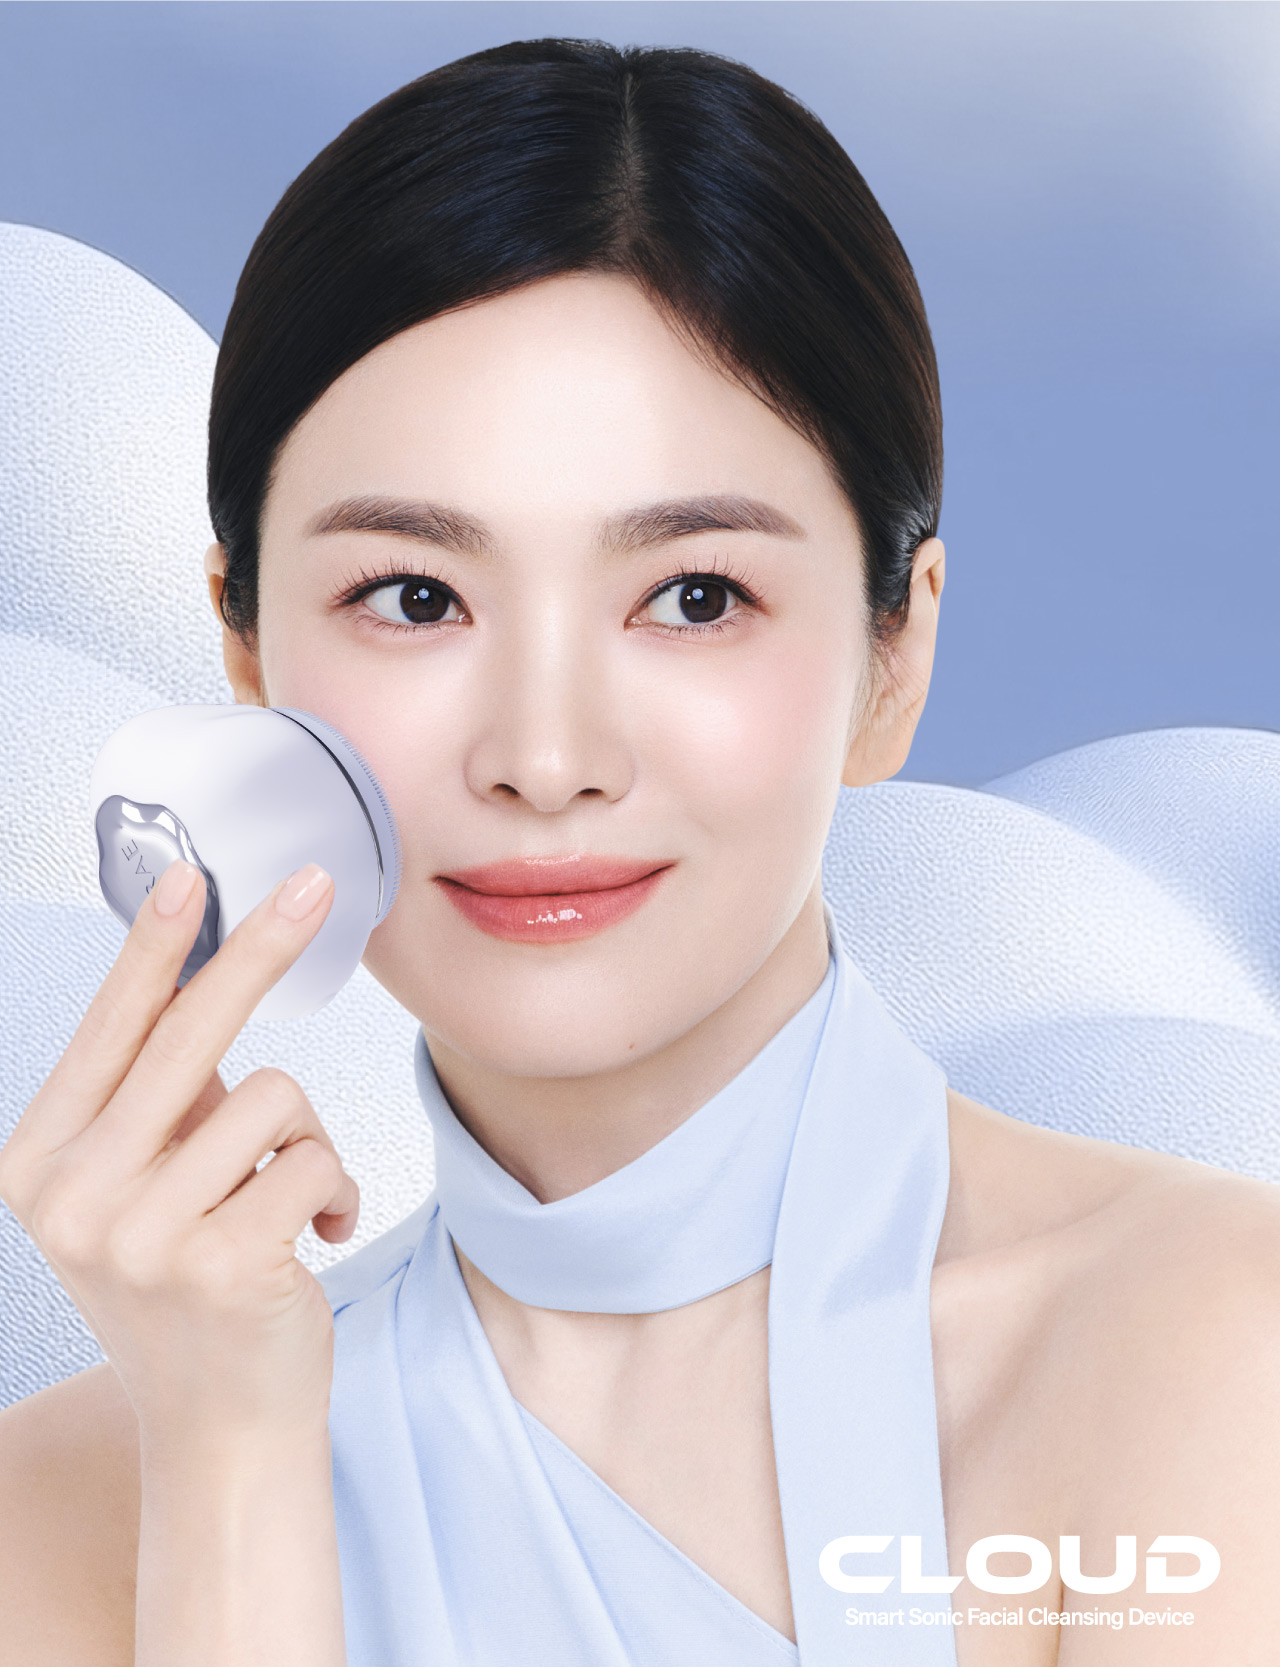 CLOUDSmart Sonic Facial Cleansing Device